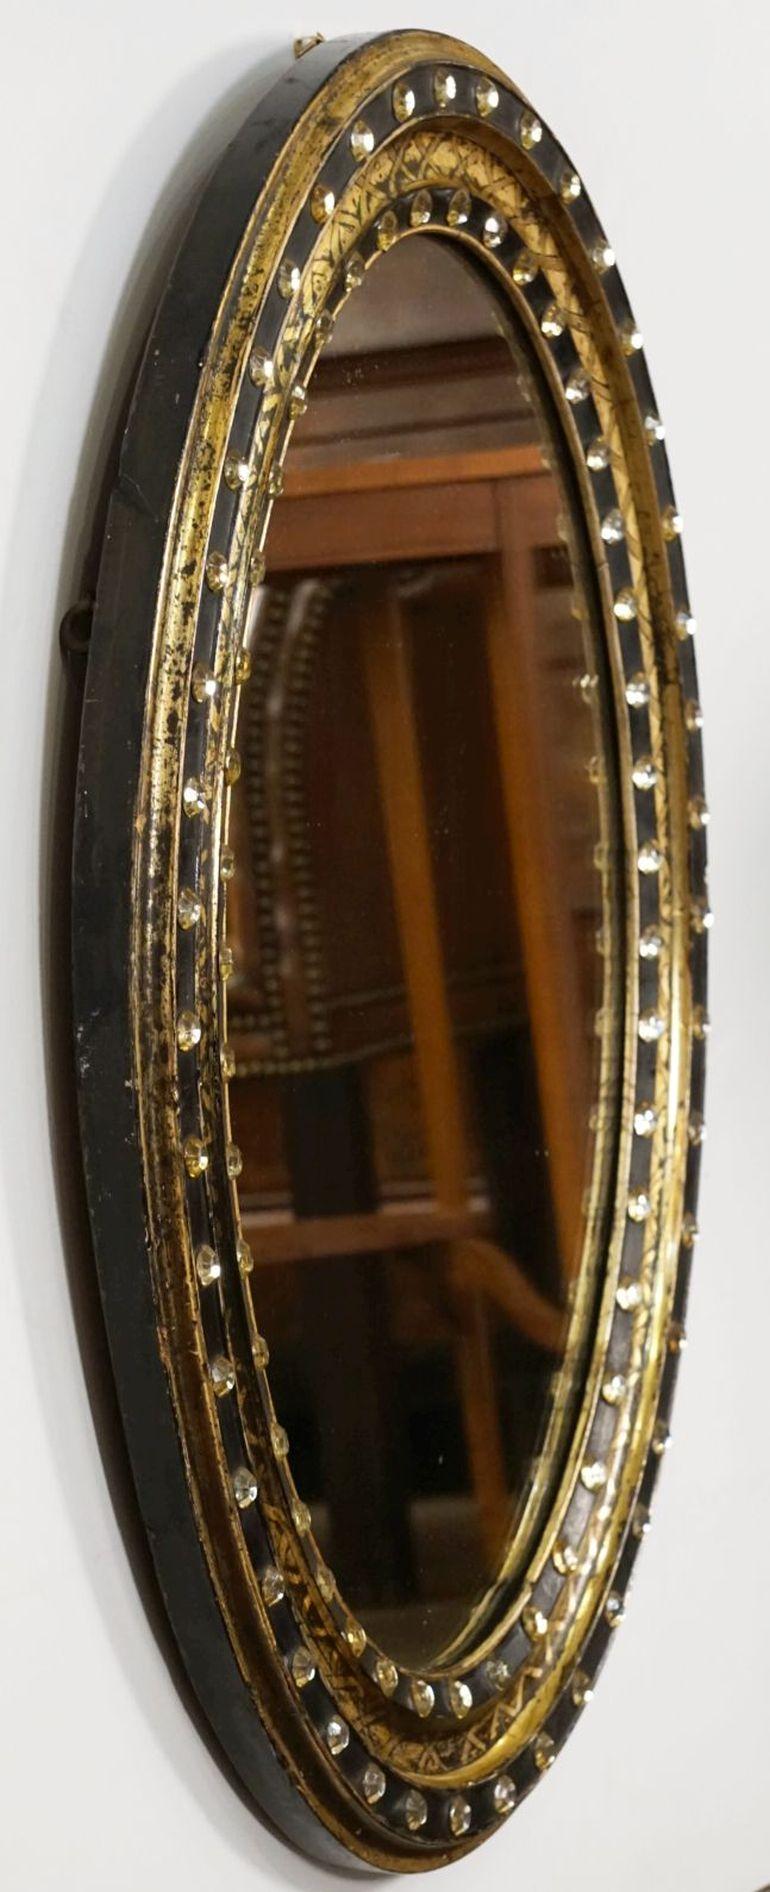 A fine Irish oval wall mirror from the 19th century, featuring a distinctive frame of alternating raised ebonized slips with original faceted glass stud decorations (Waterford border beads), separated by gilded and X-decorated recesses. 

Measures: